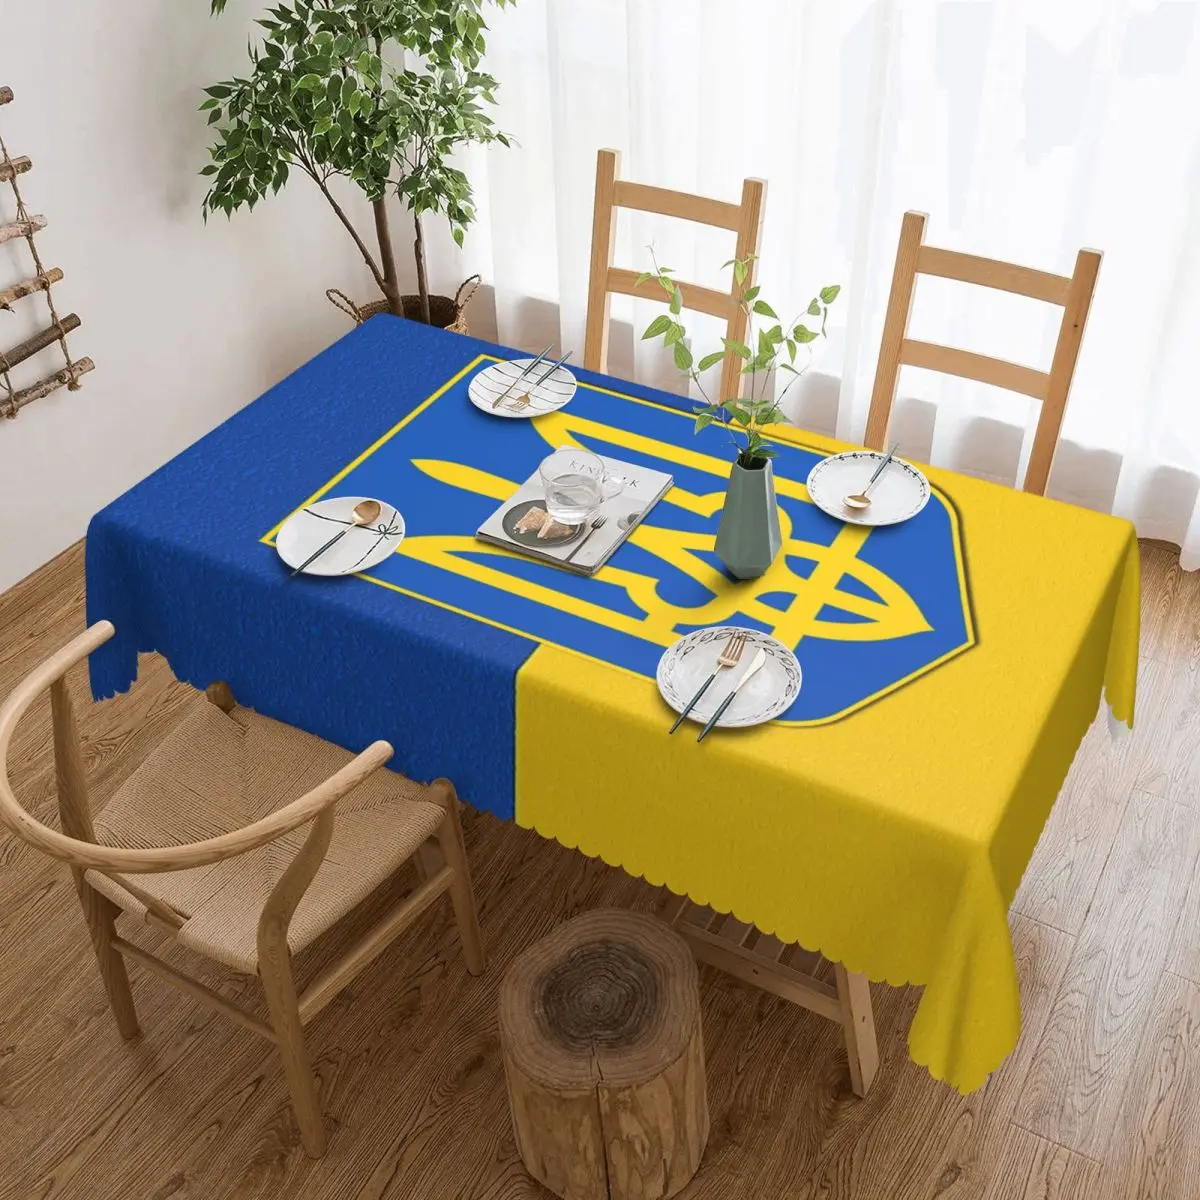 

Flag Of Ukraine And Coat Of Arms Of Ukraine Rectangular Tablecloth Oilproof Table Cloth Ukrainian Patriotic Gift Table Cover